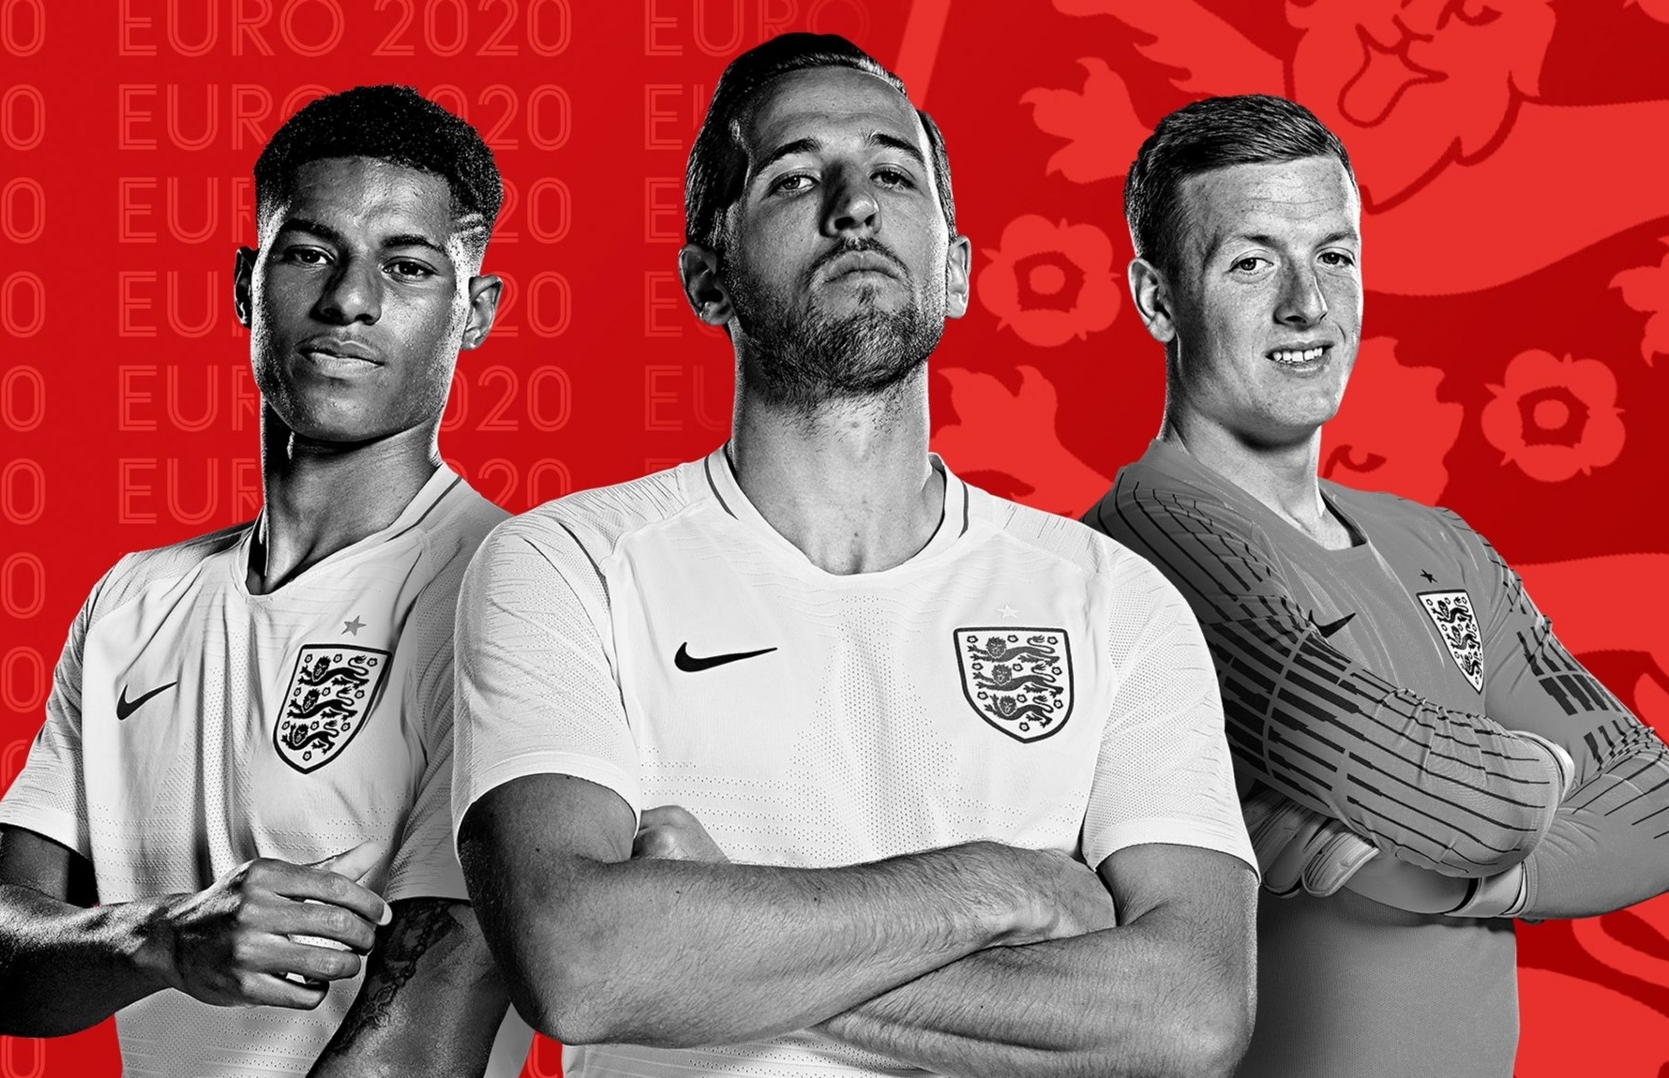 England Euro 2020: Fixtures, Full Squad, Key Players, Coach and Predictions